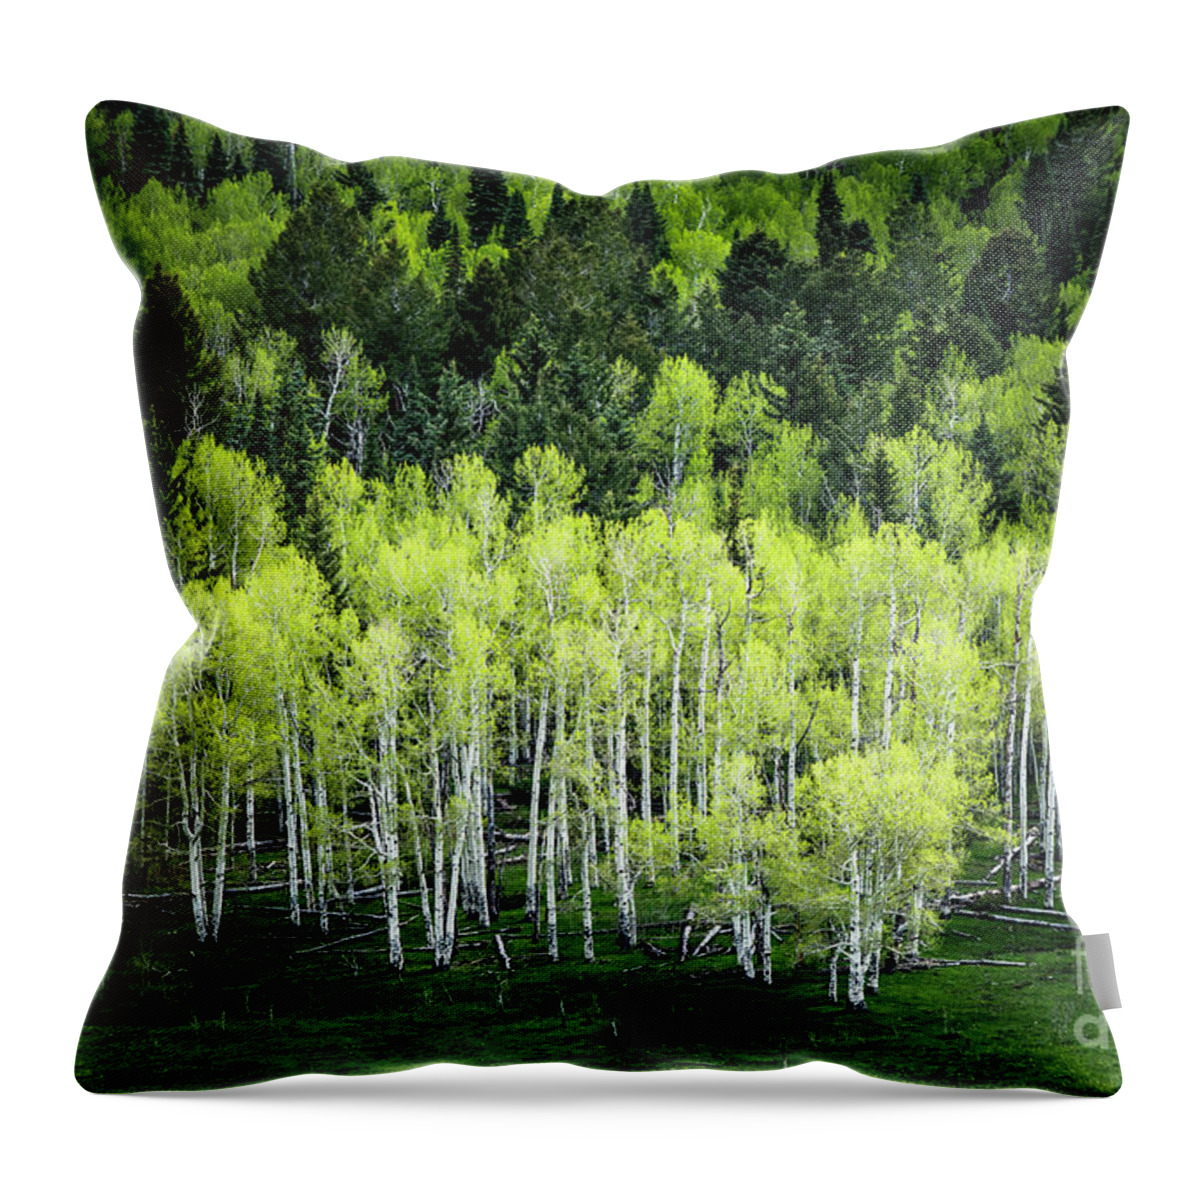 Aspen Trees Throw Pillow featuring the photograph A Thousand Shades of Green by The Forests Edge Photography - Diane Sandoval